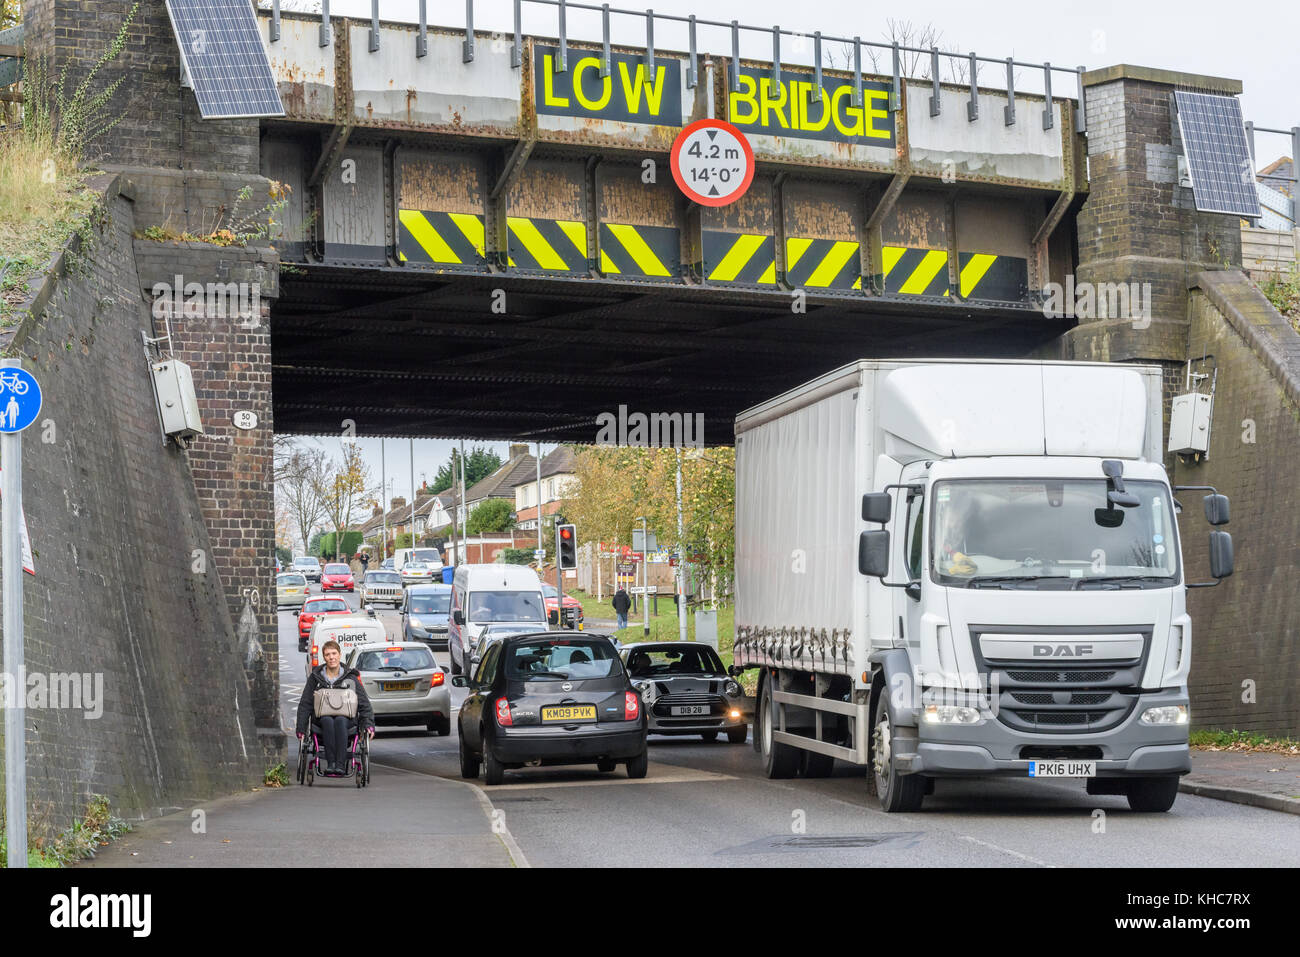 Low railway bridge on the A4300 Rothwell road at Kettering, England. Stock Photo